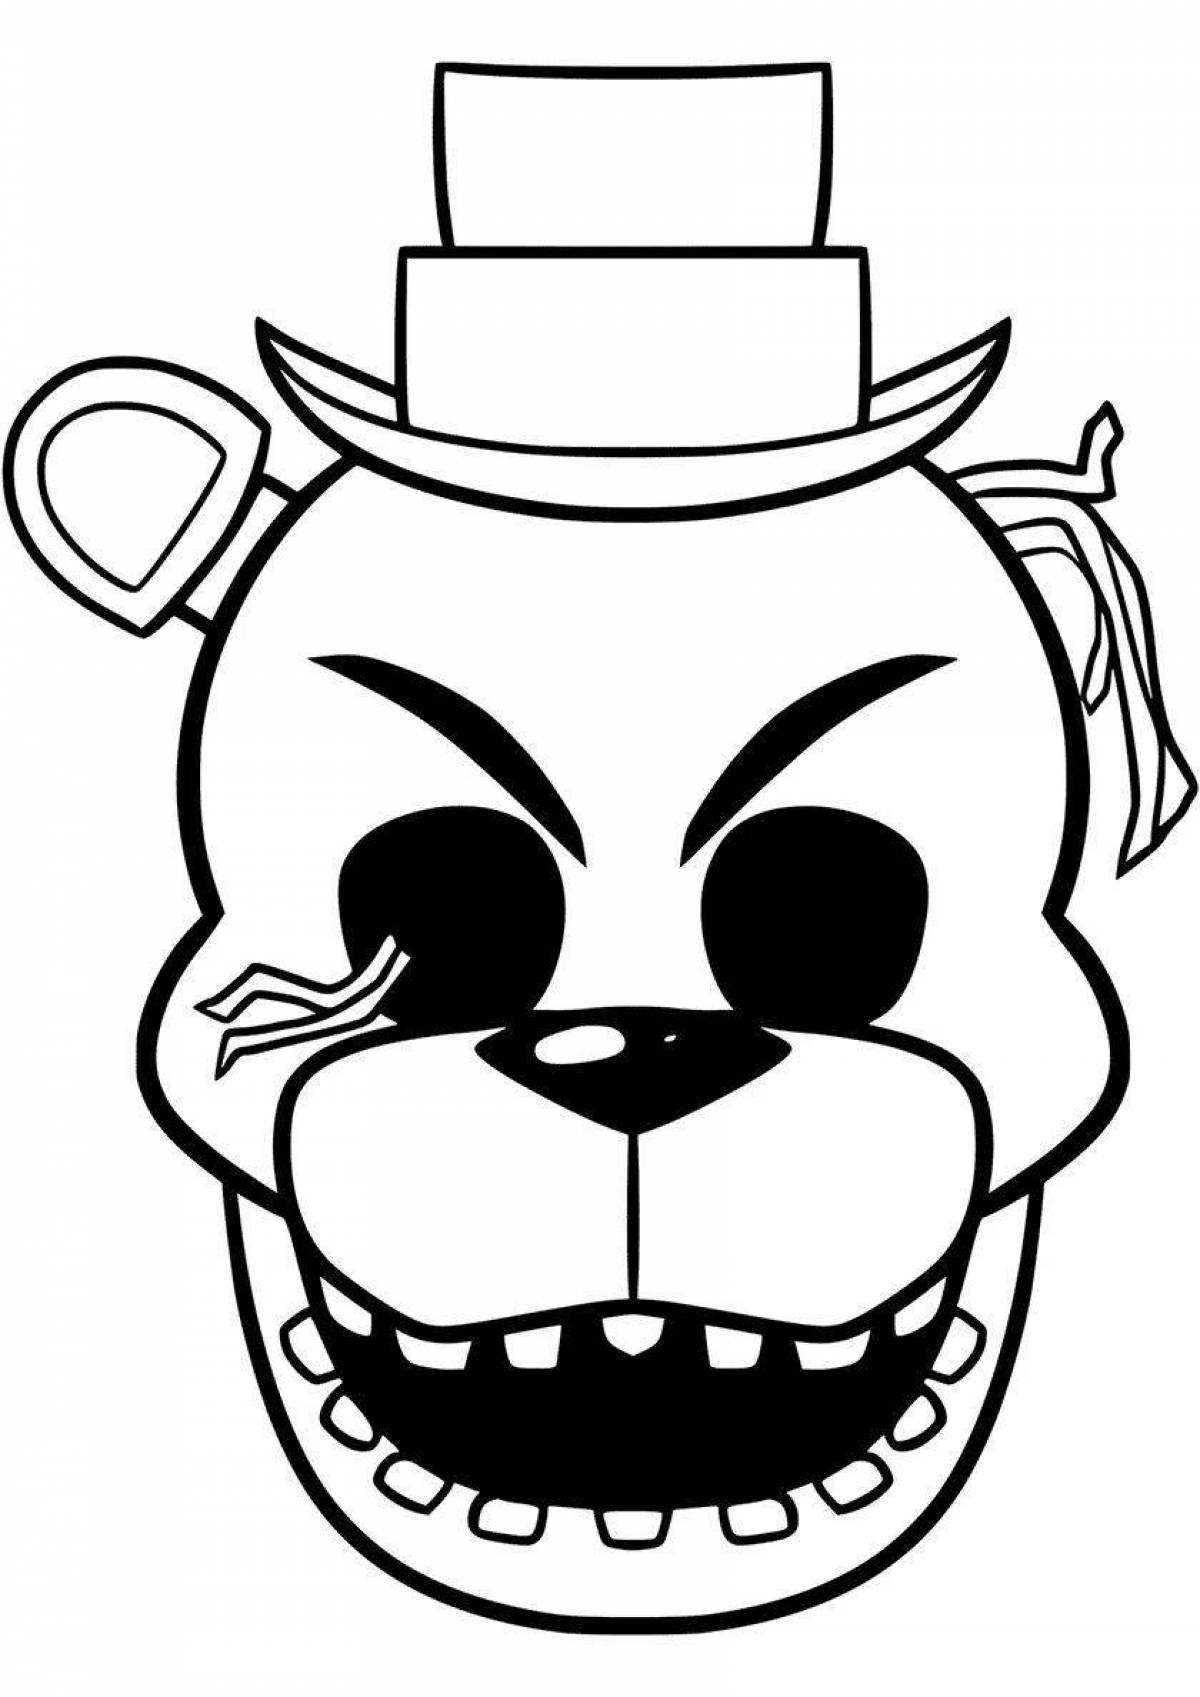 Coloring page energetic freddy bear